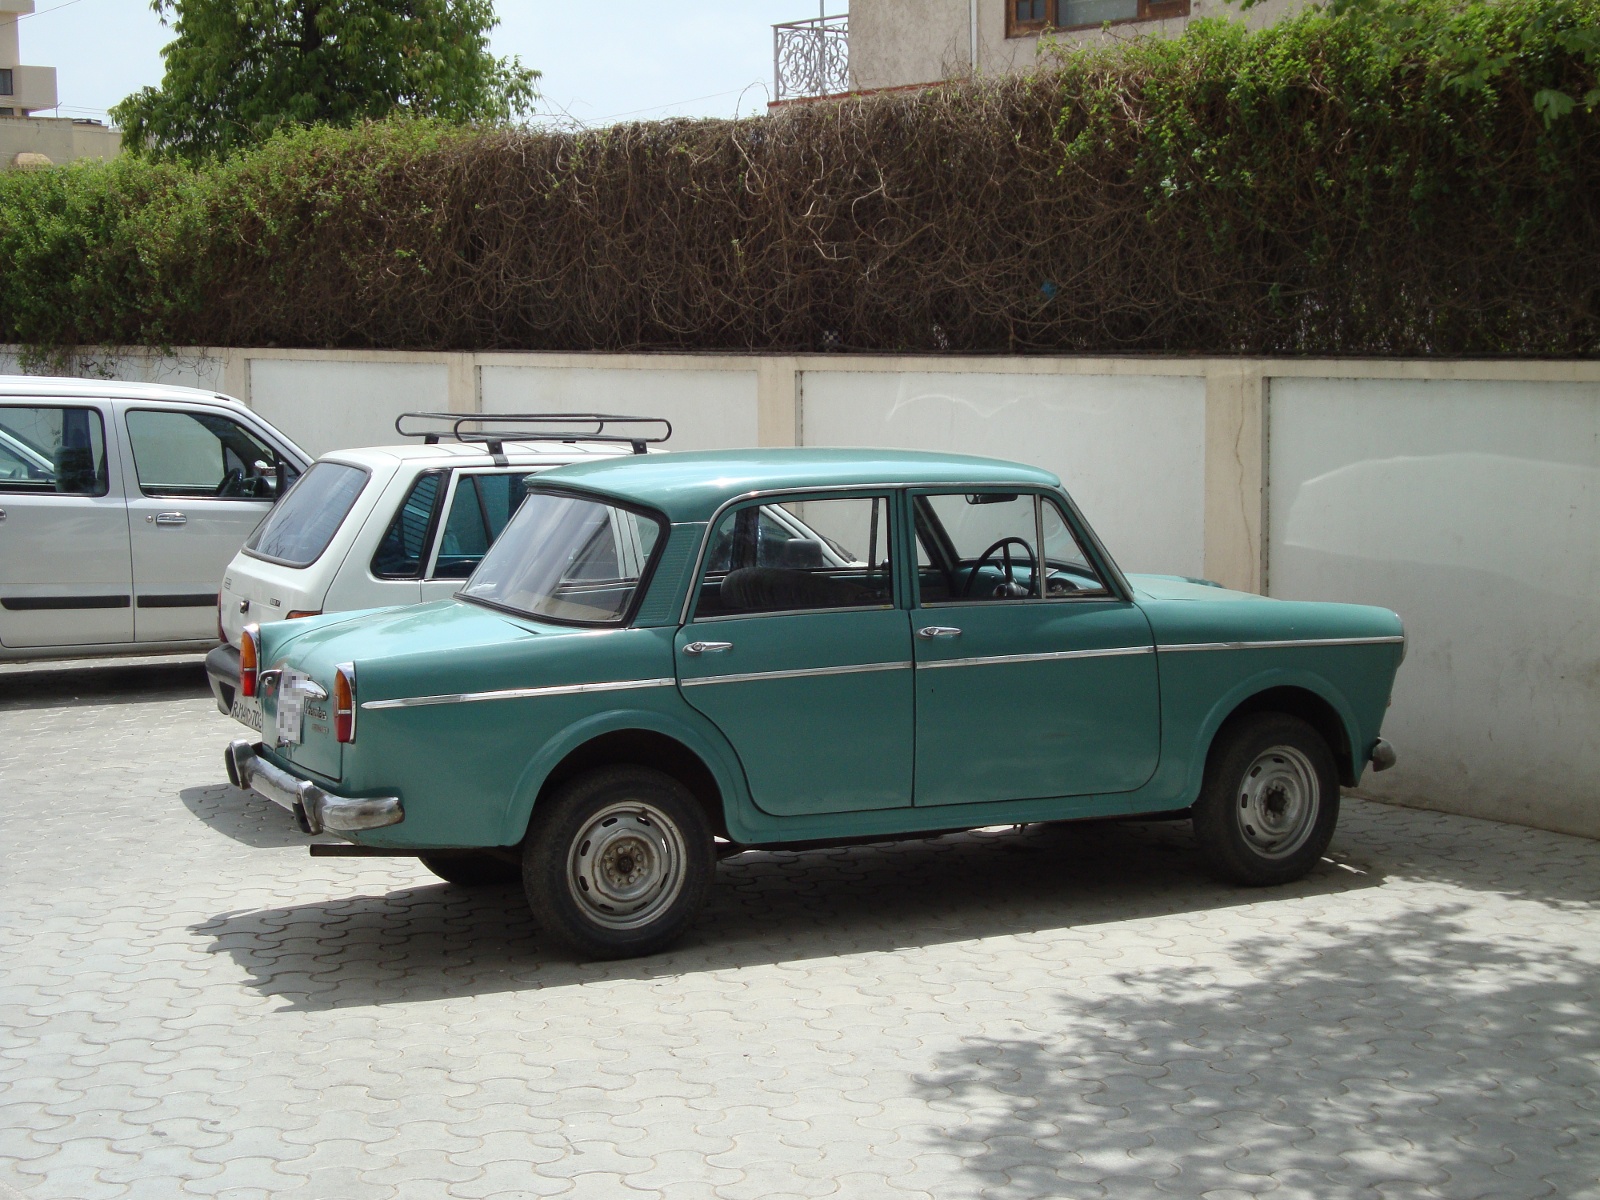 A Premier Padmini spotted in Jaipur.